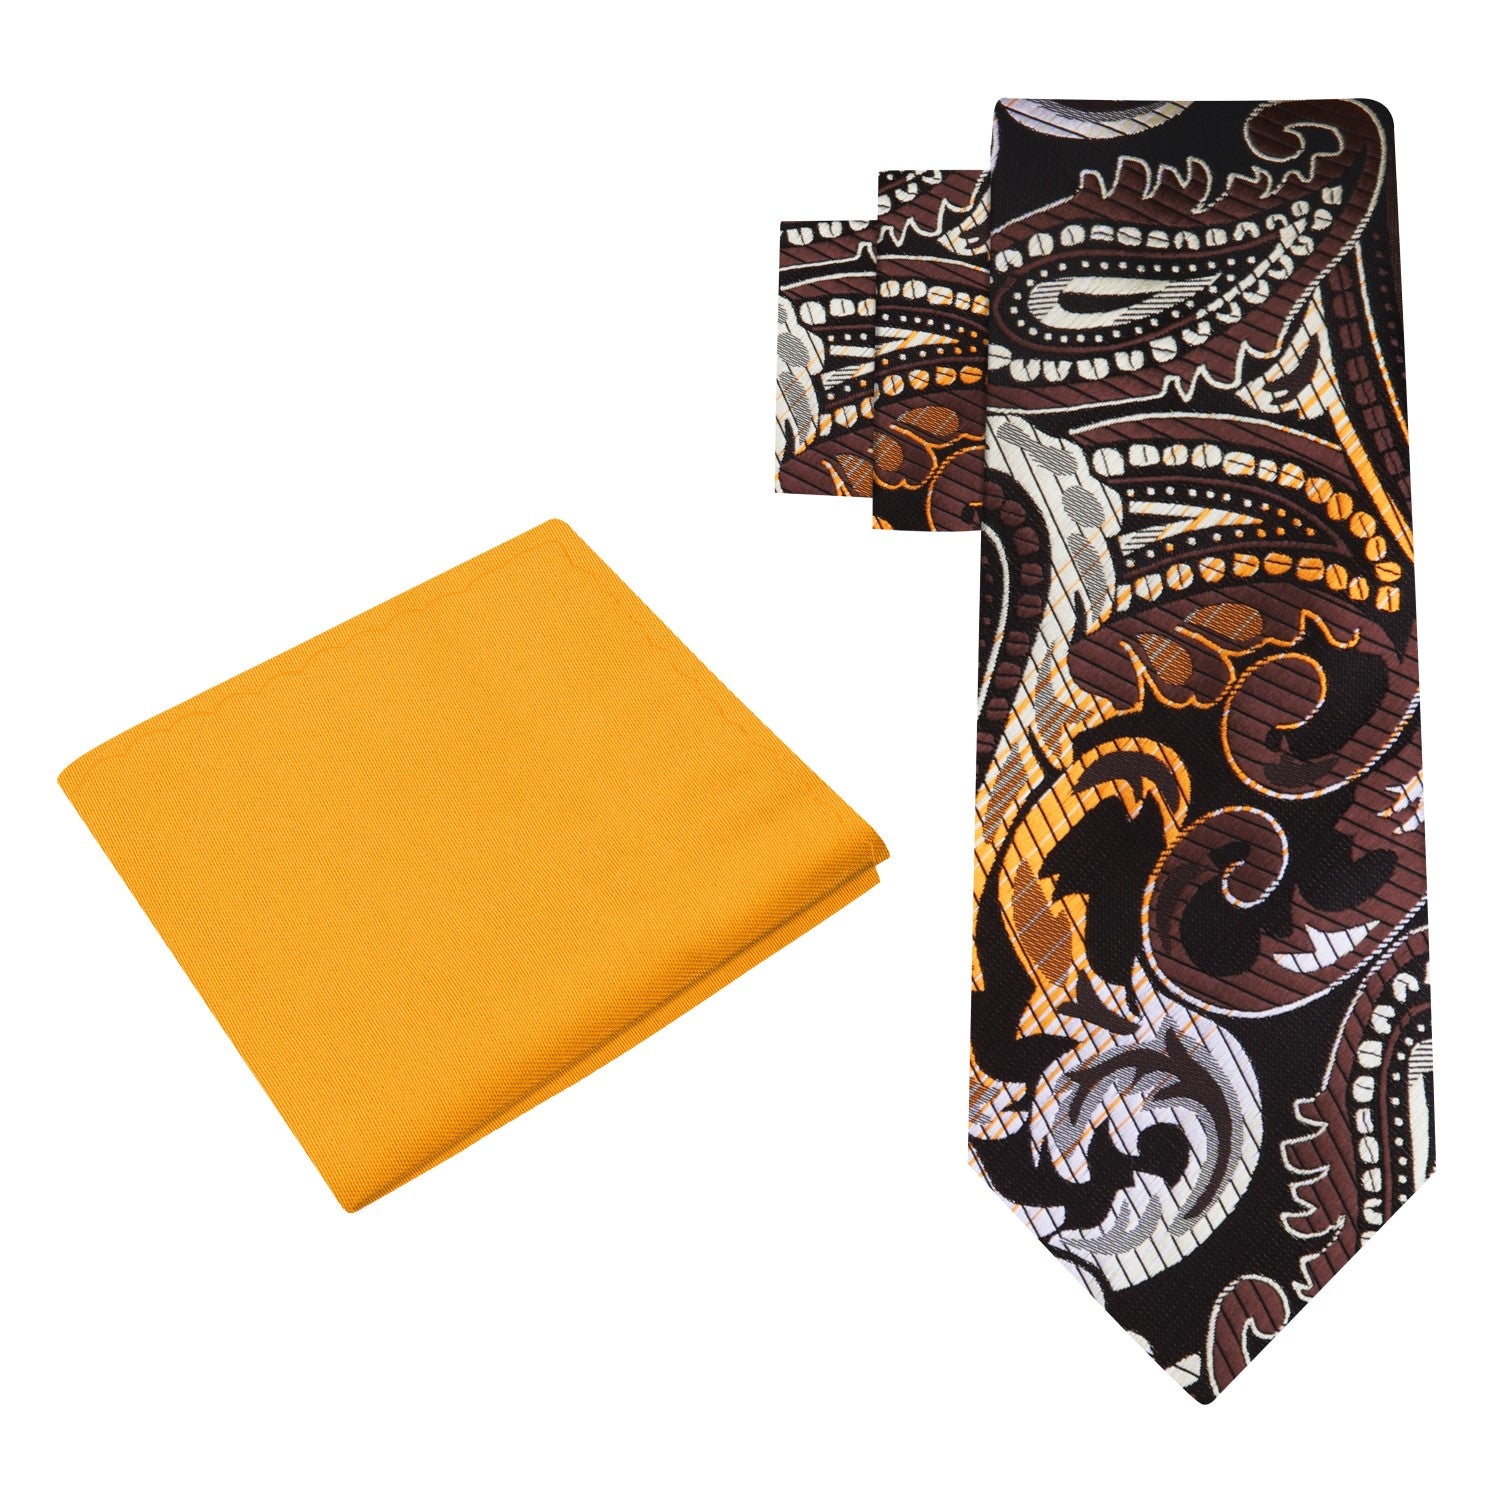 View 2: A Brown, Yellow Paisley Pattern Silk Necktie, With Bright Gold Pocket Square